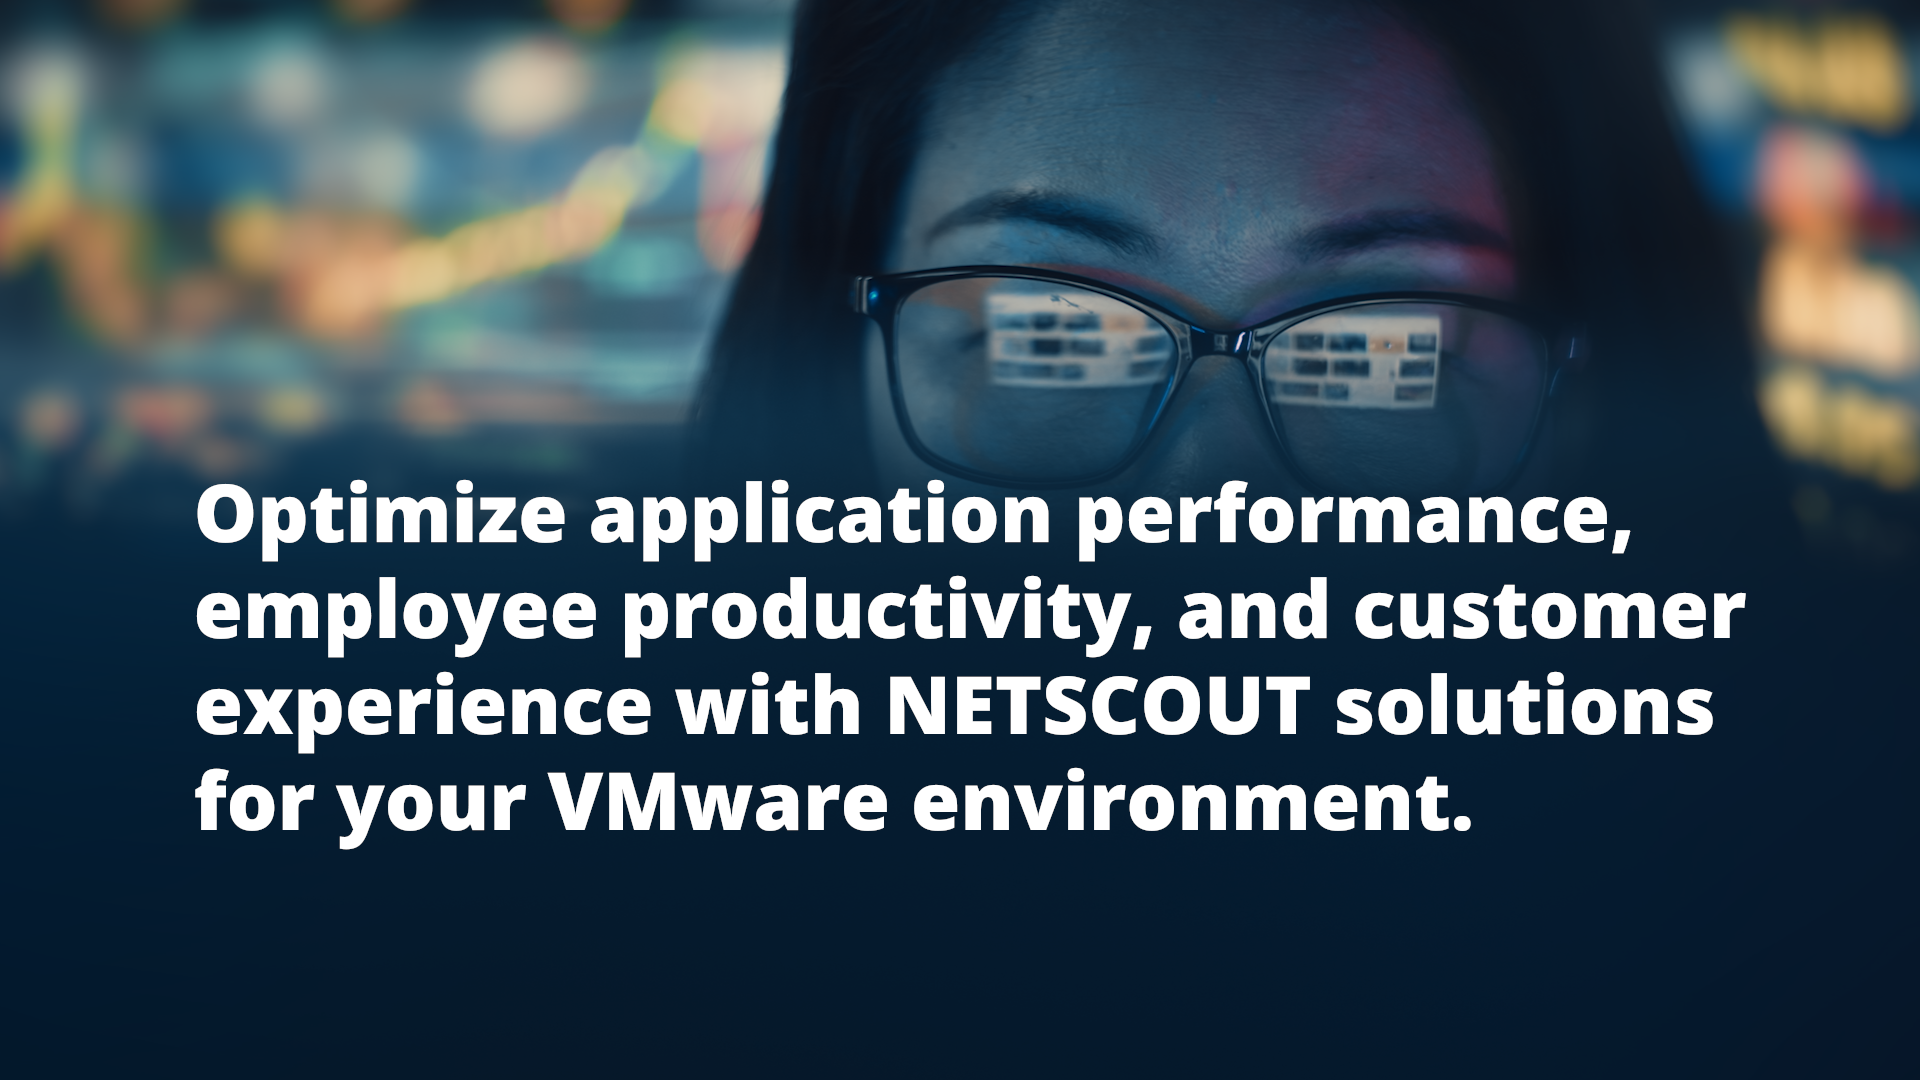 The NETSCOUT / VMware Partnership